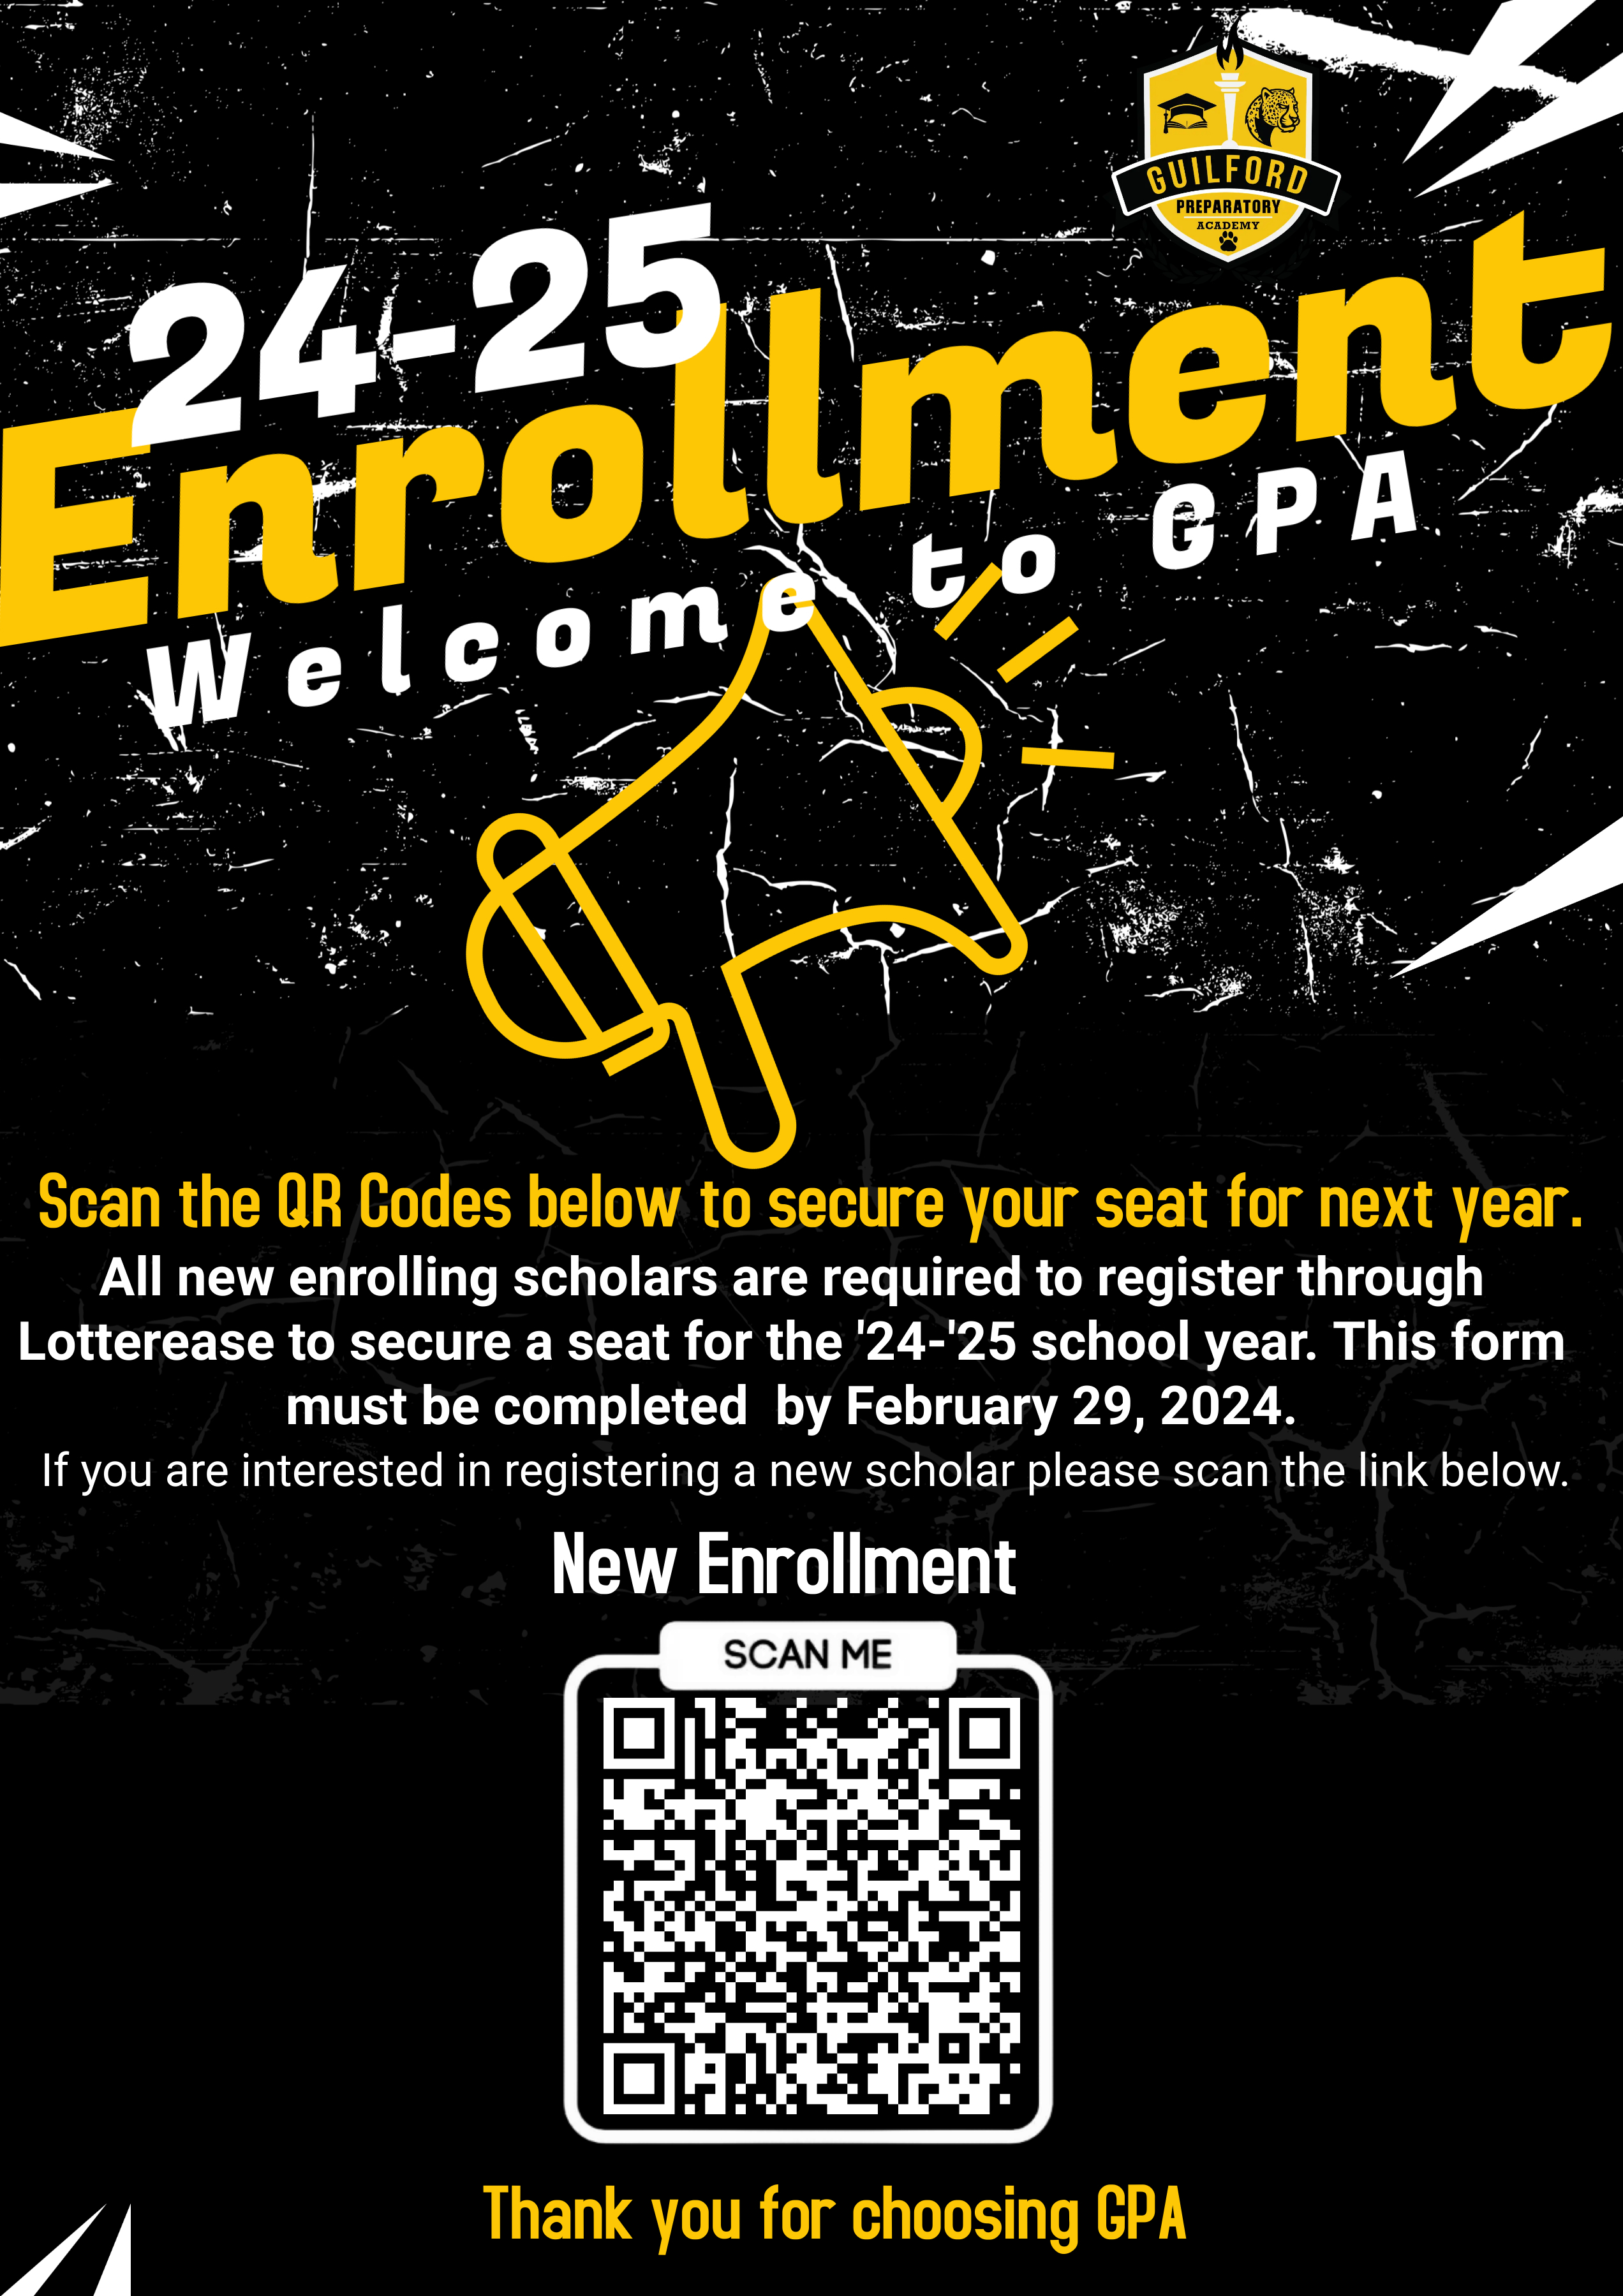 All new enrolling scholars are required to register through Lotterease to secure a seat for the 2425 school year This for